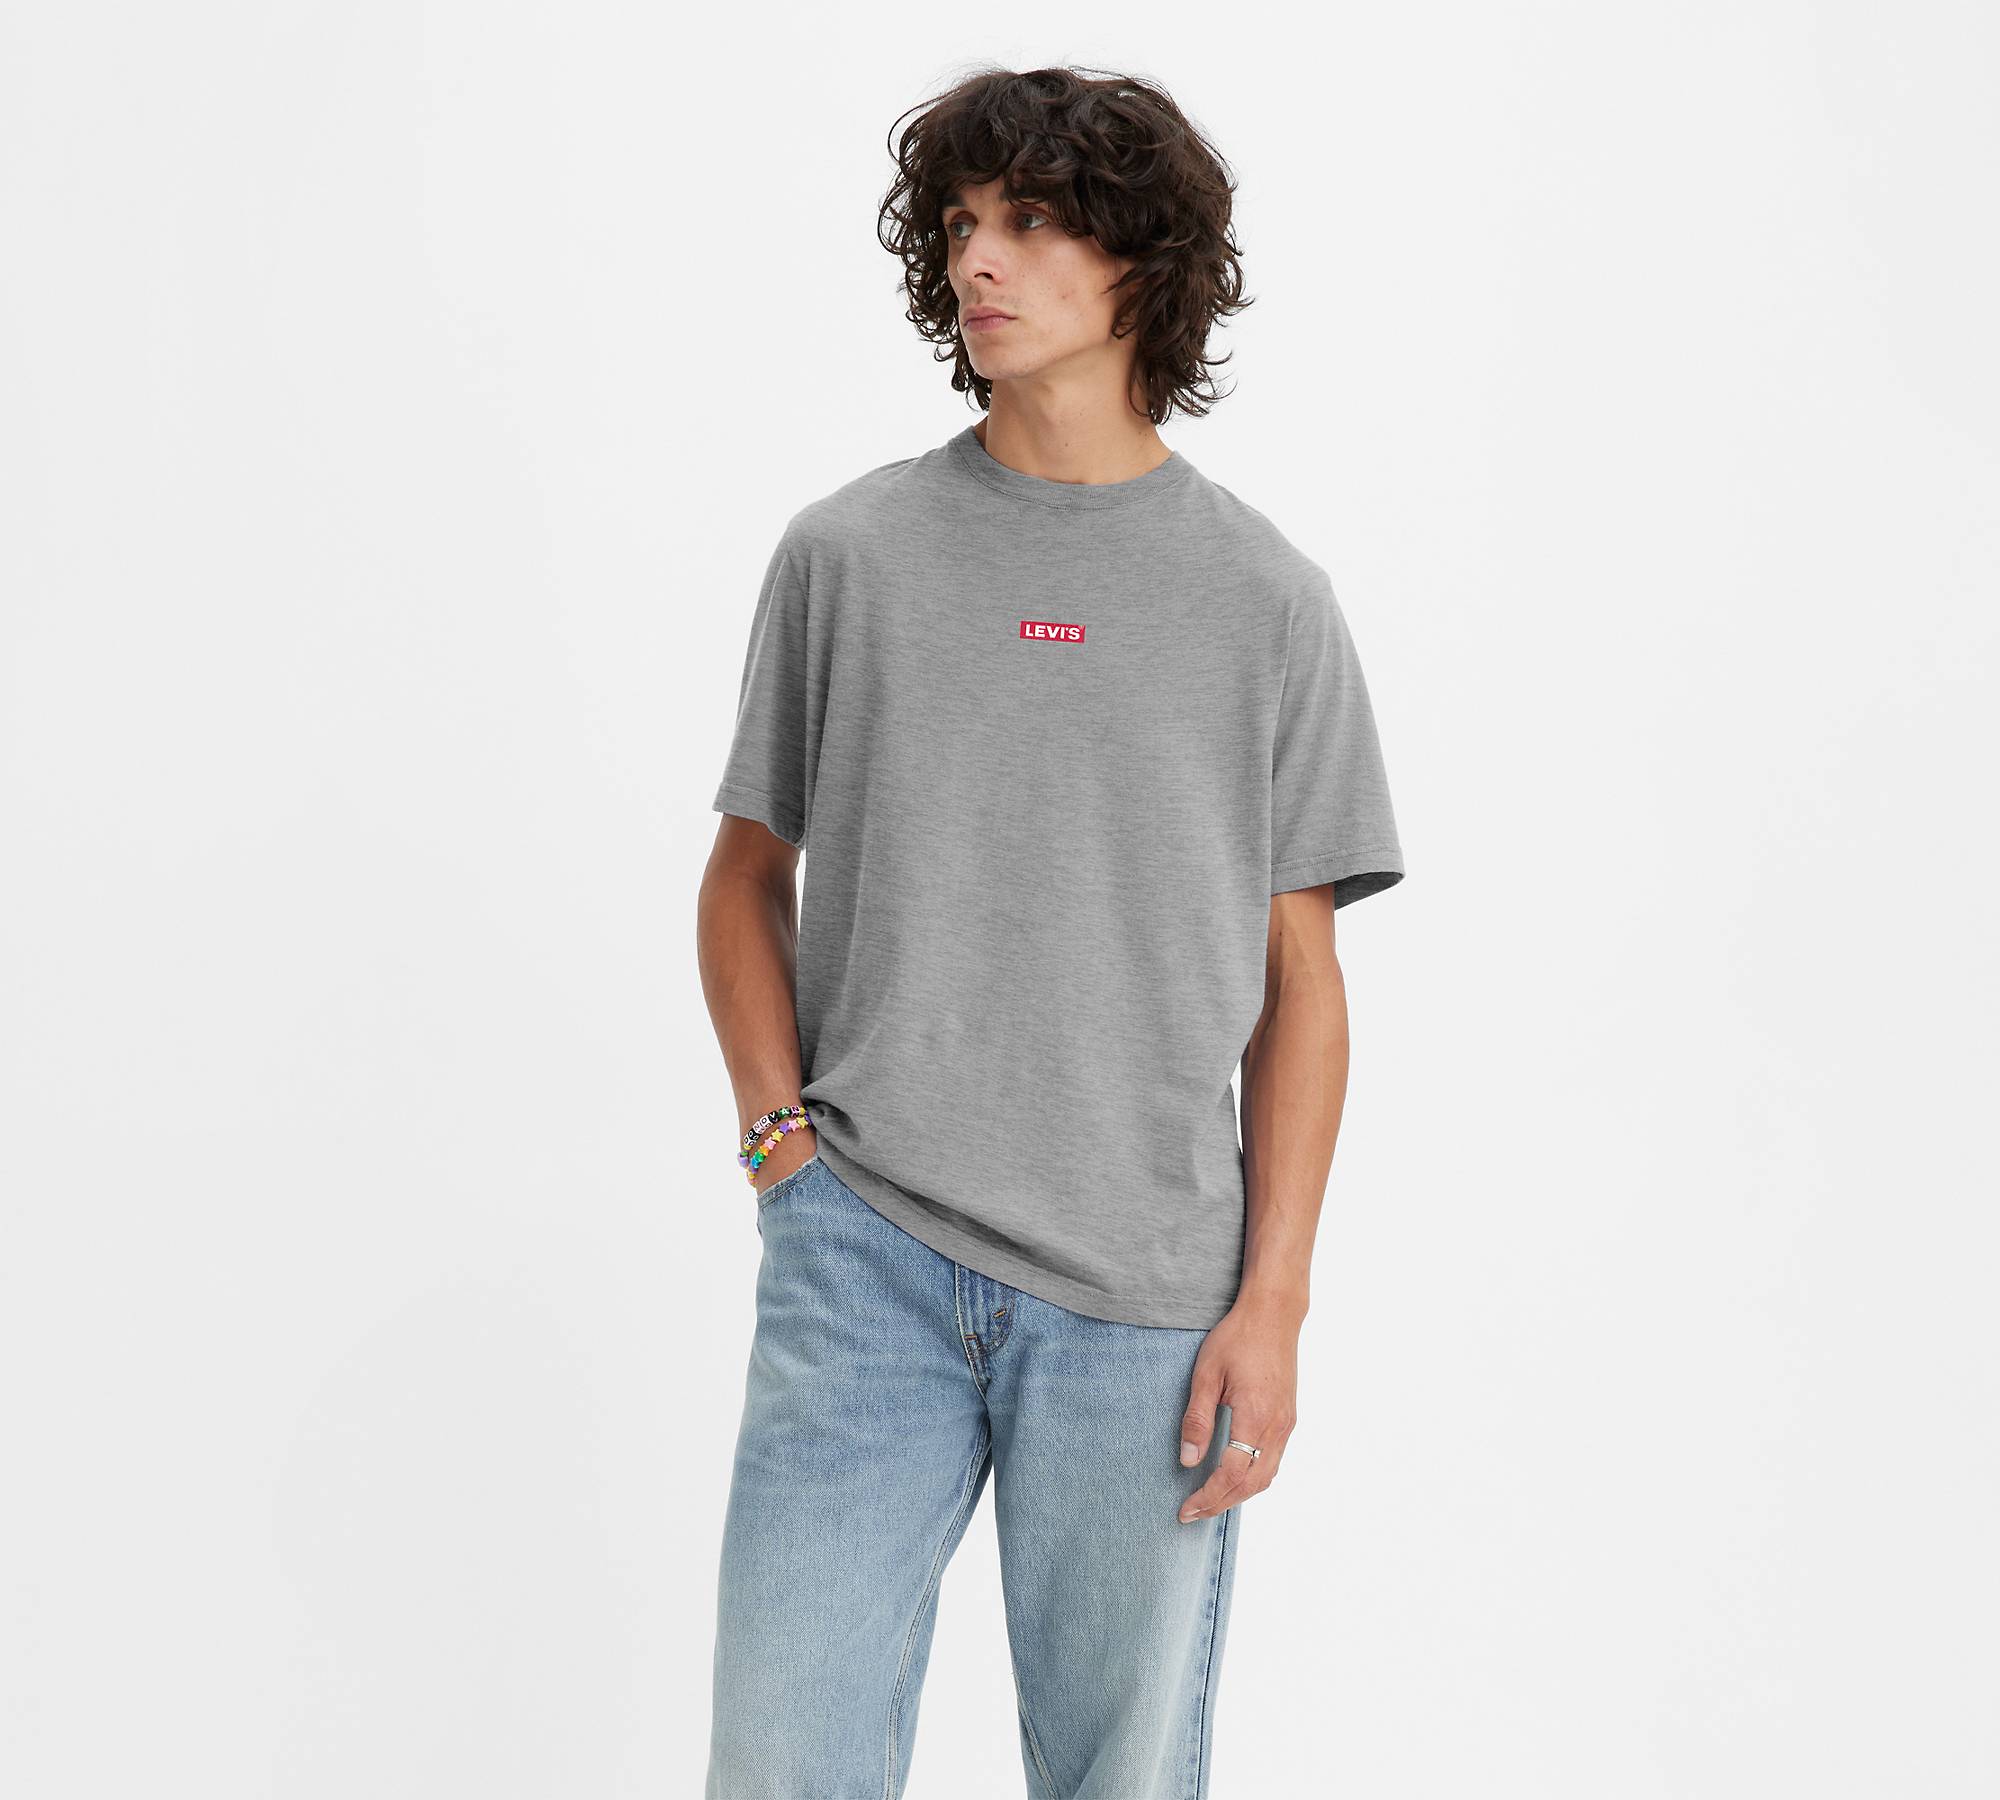 Relaxed Fit Kurzarm T-Shirt mit Baby Tab 1